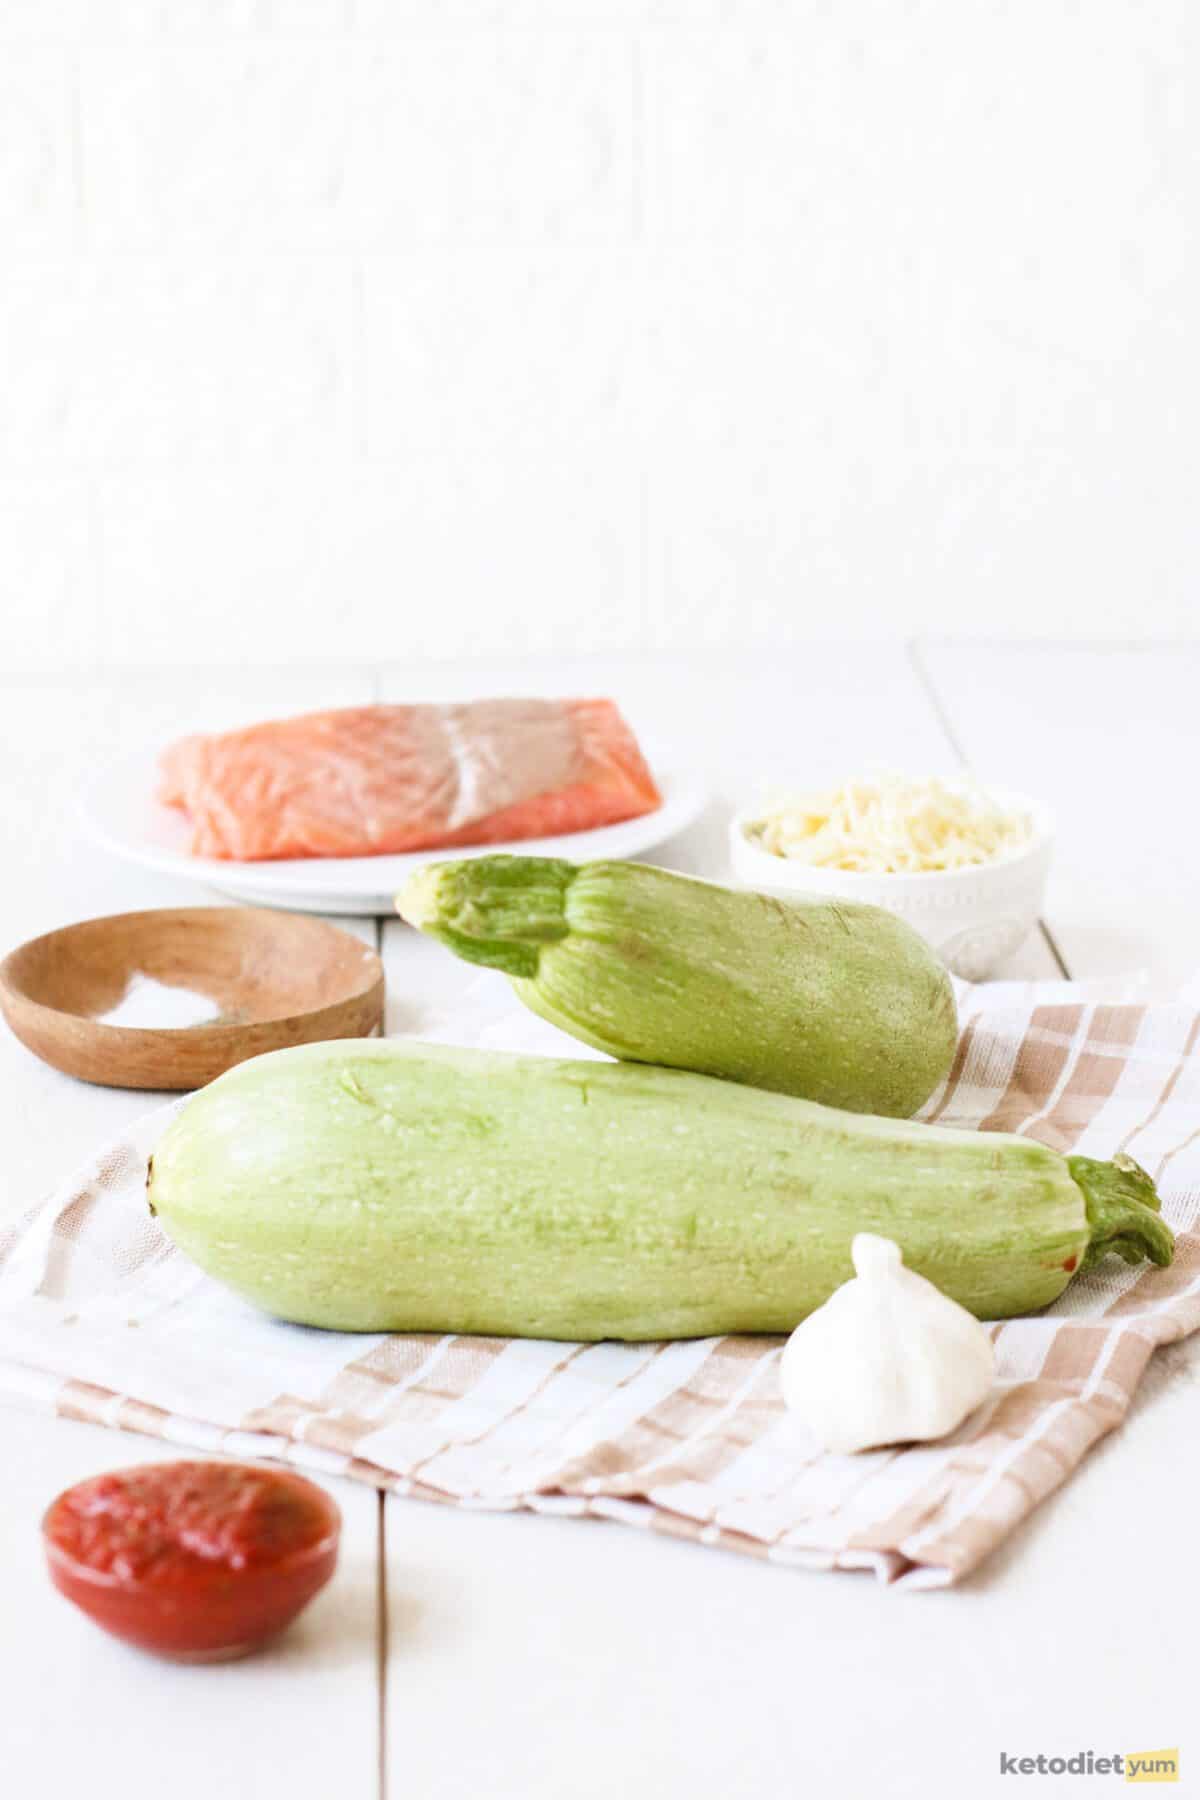 Ingredients arranged on a table to make keto salmon stuffed zucchini boats